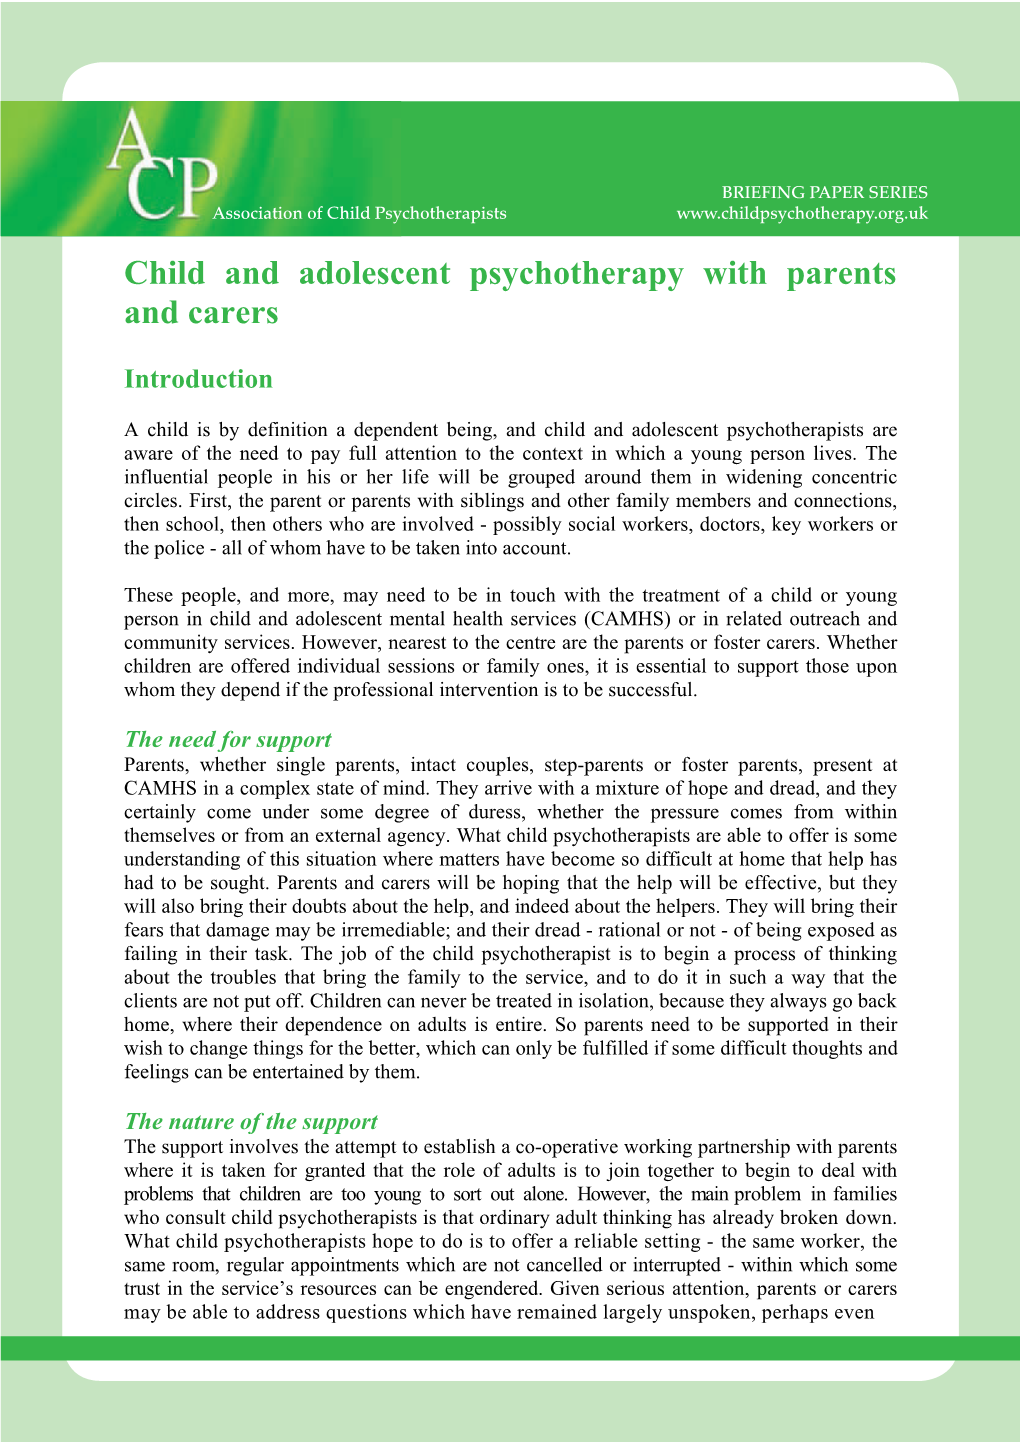 Child and Adolescent Psychotherapy with Parents and Carers